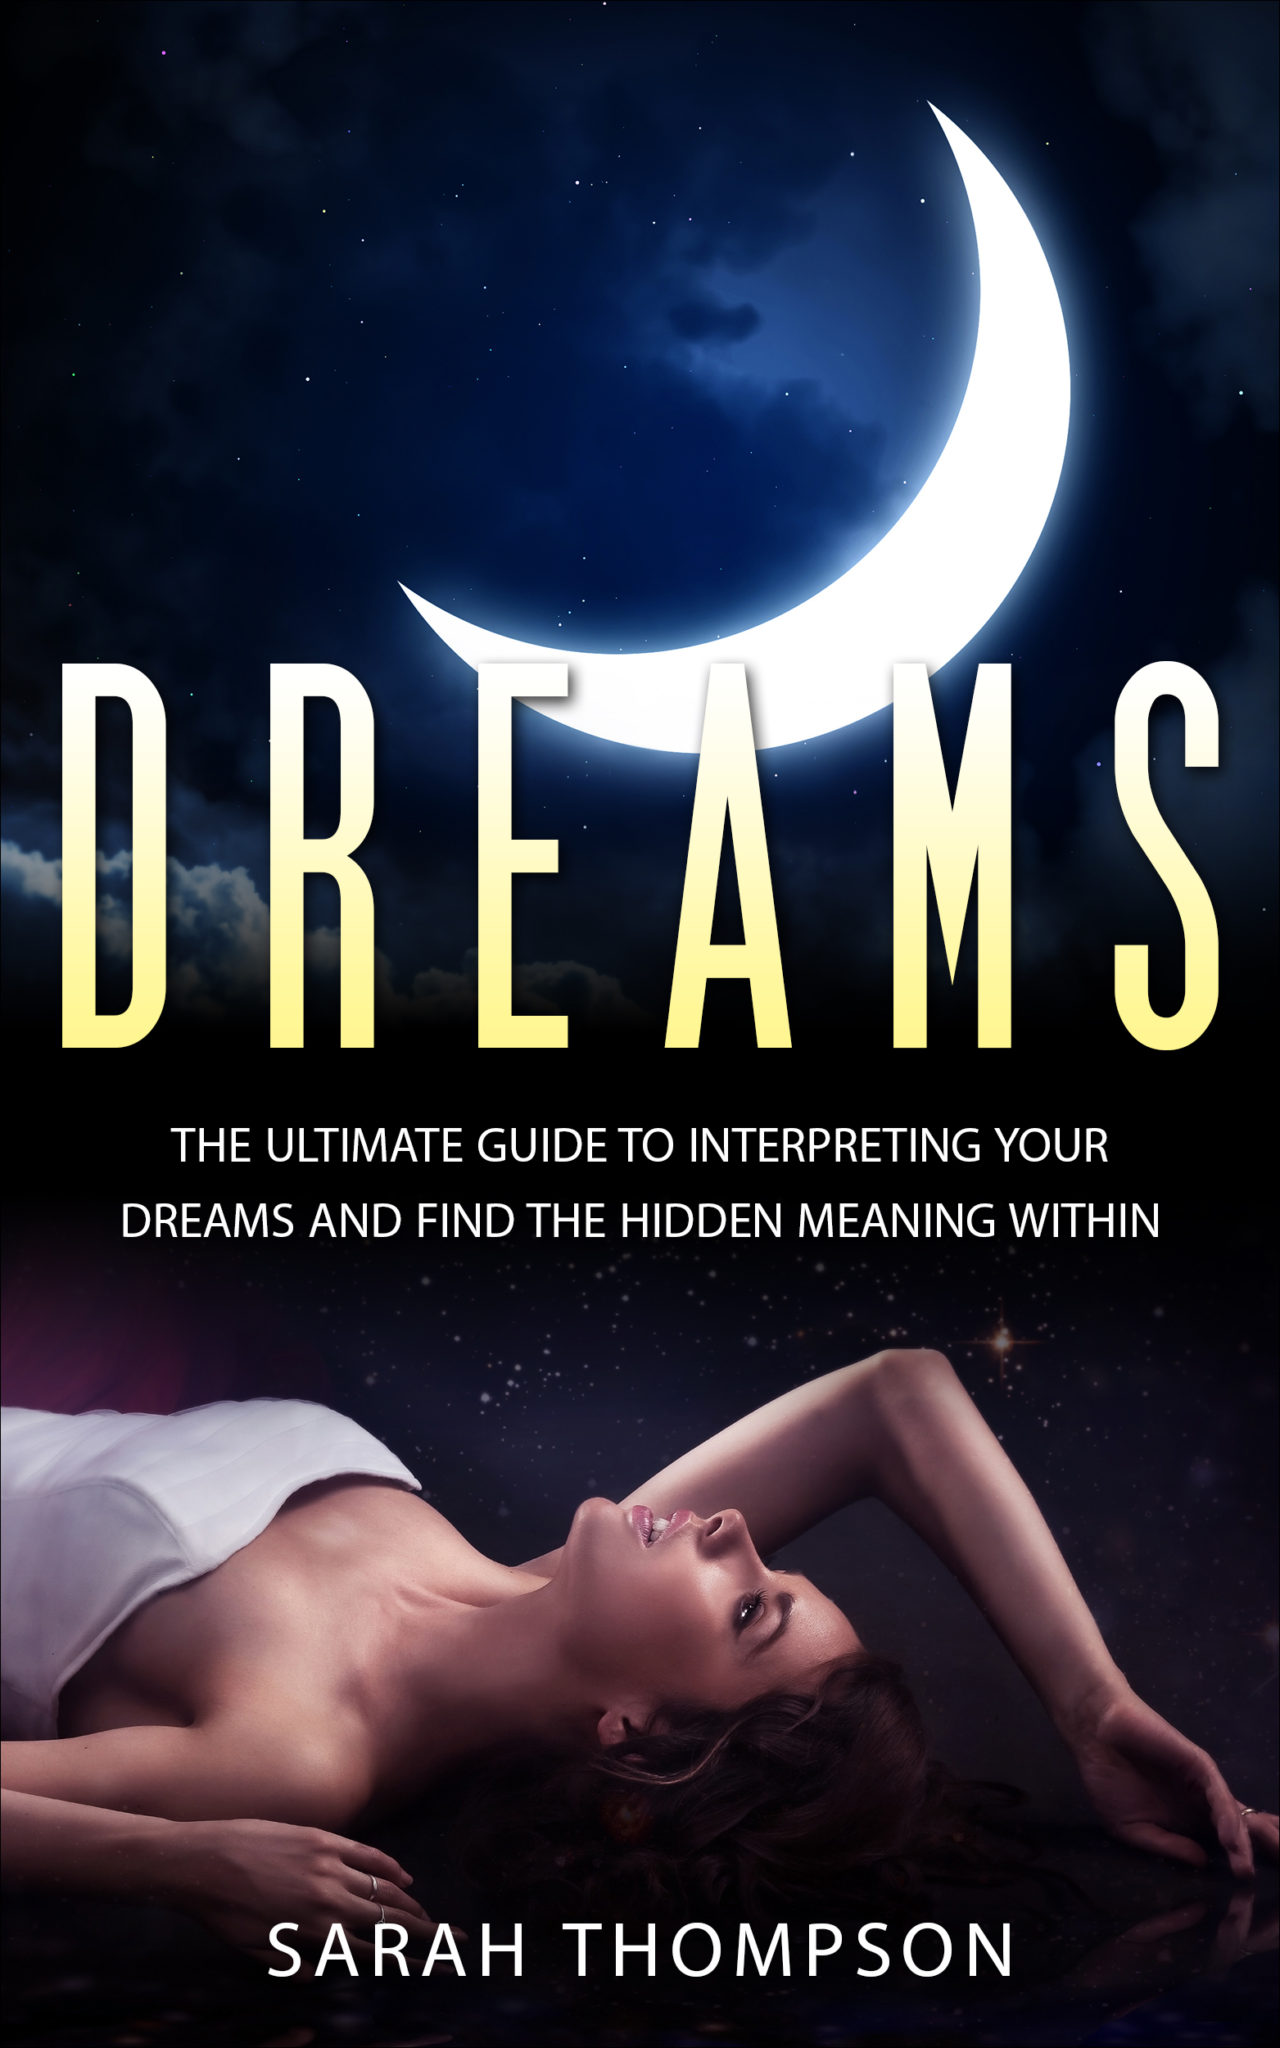 FREE: Dreams: The Ultimate Guide to Interpreting Your Dreams and Finding the Hidden Meanings by Sarah Thompson